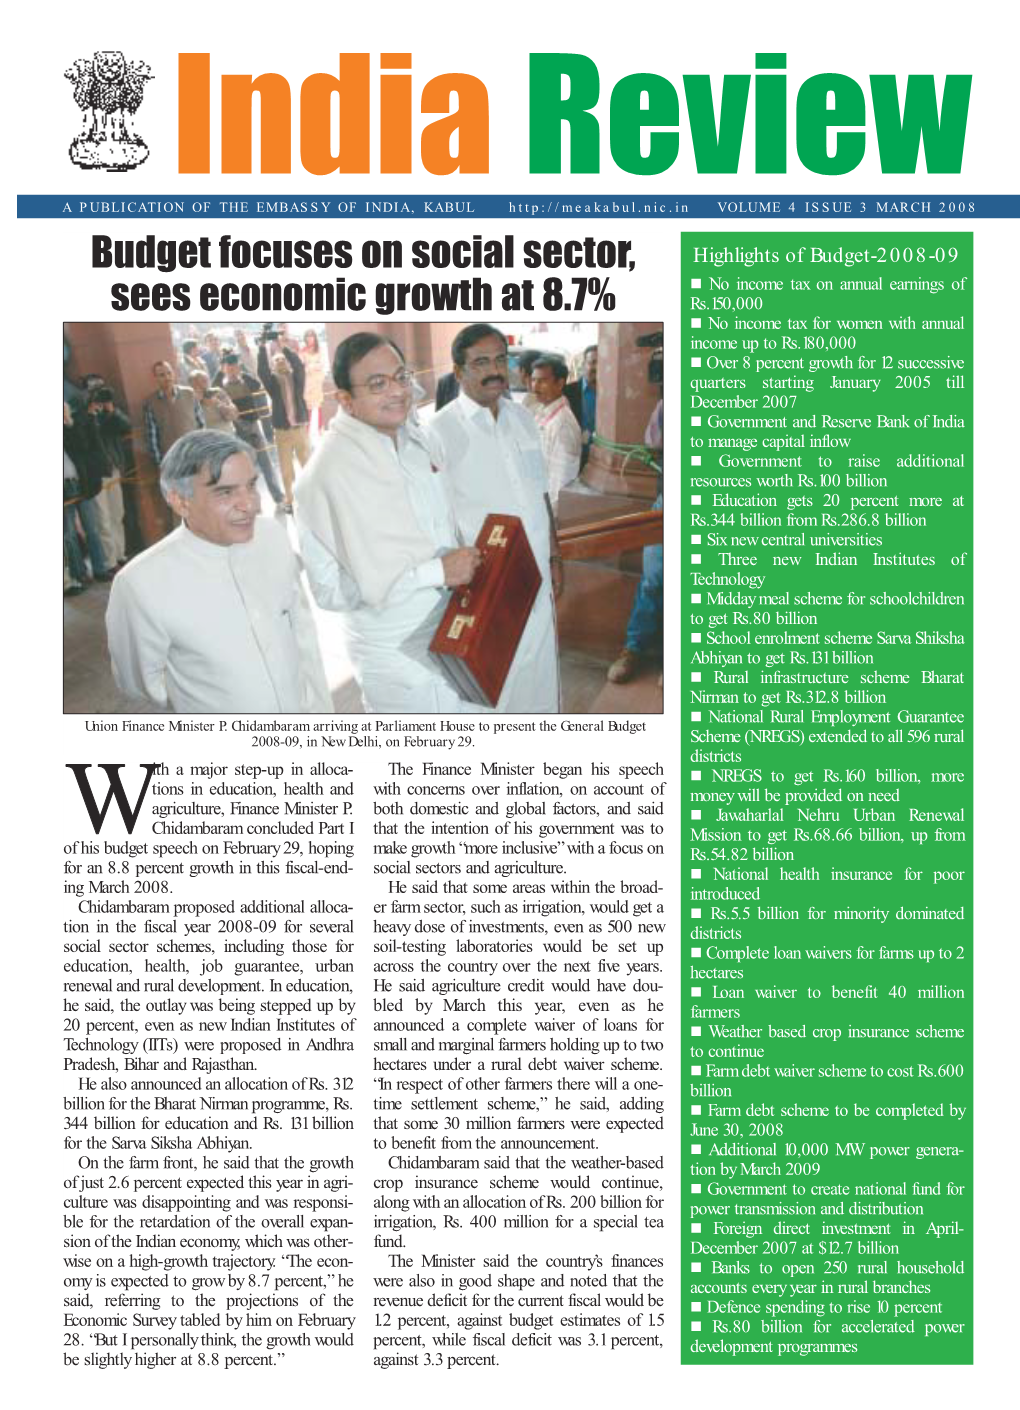 Budget Focuses on Social Sector, Sees Economic Growth at 8.7%